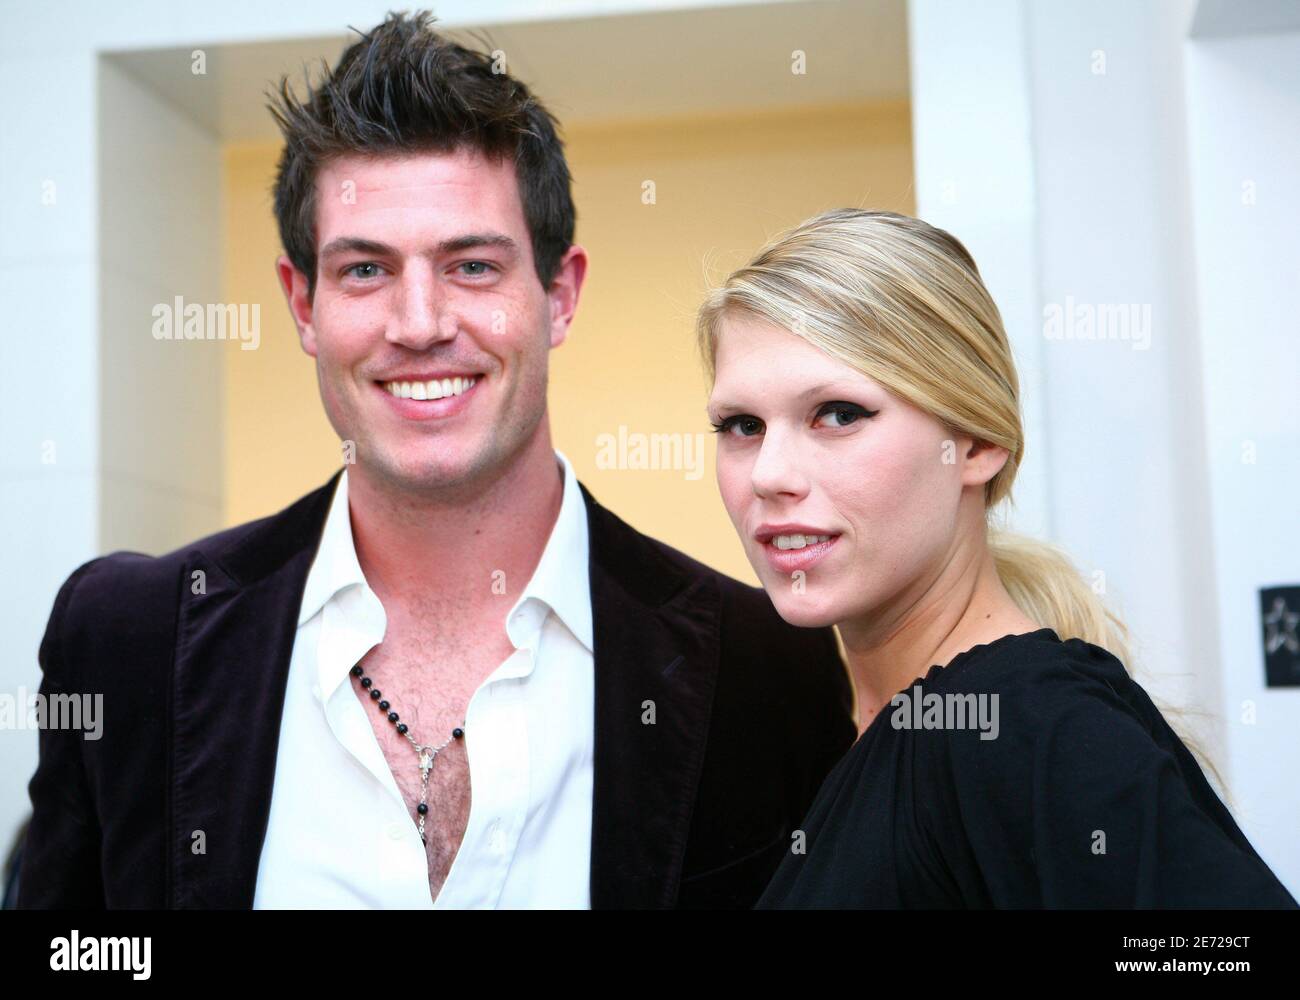 Feb. 9, 2007 - New York City: Jesse Palmer and Alexandra Richards at the Alice + Olivia fashion show at 'The Atelier' during Mercedes-Benz Fall 2007 fashion week. Photo by Sara Jaye Weiss/AbacaUSA.com (pictured: Jesse Palmer, Alexandra Richards) Stock Photo